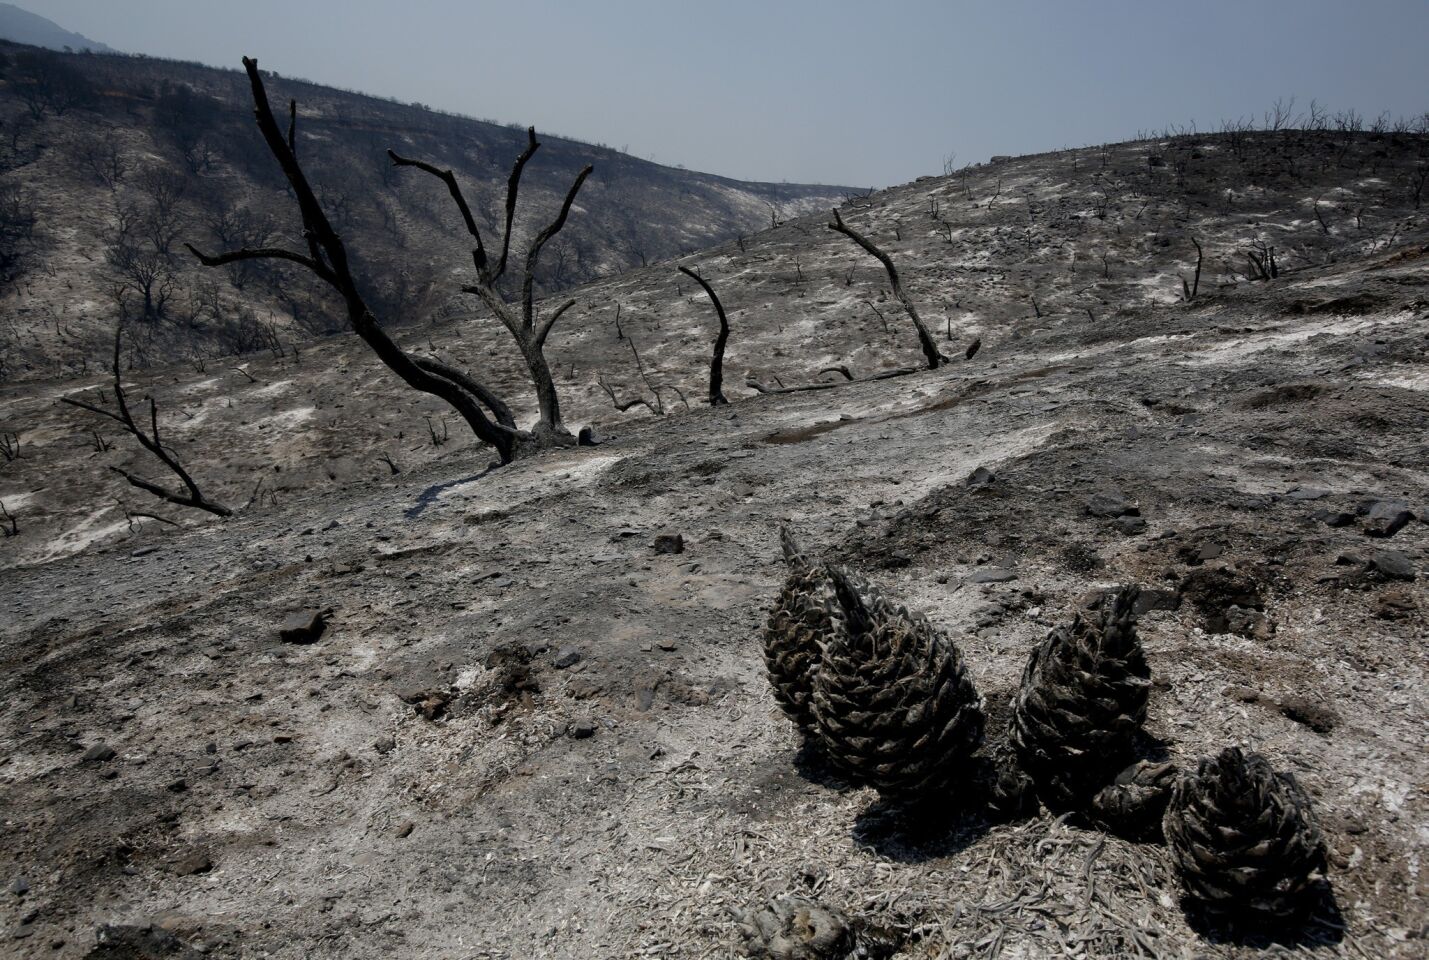 Scorched earth and charred trees left behind the Springs fire above Hidden Valley.